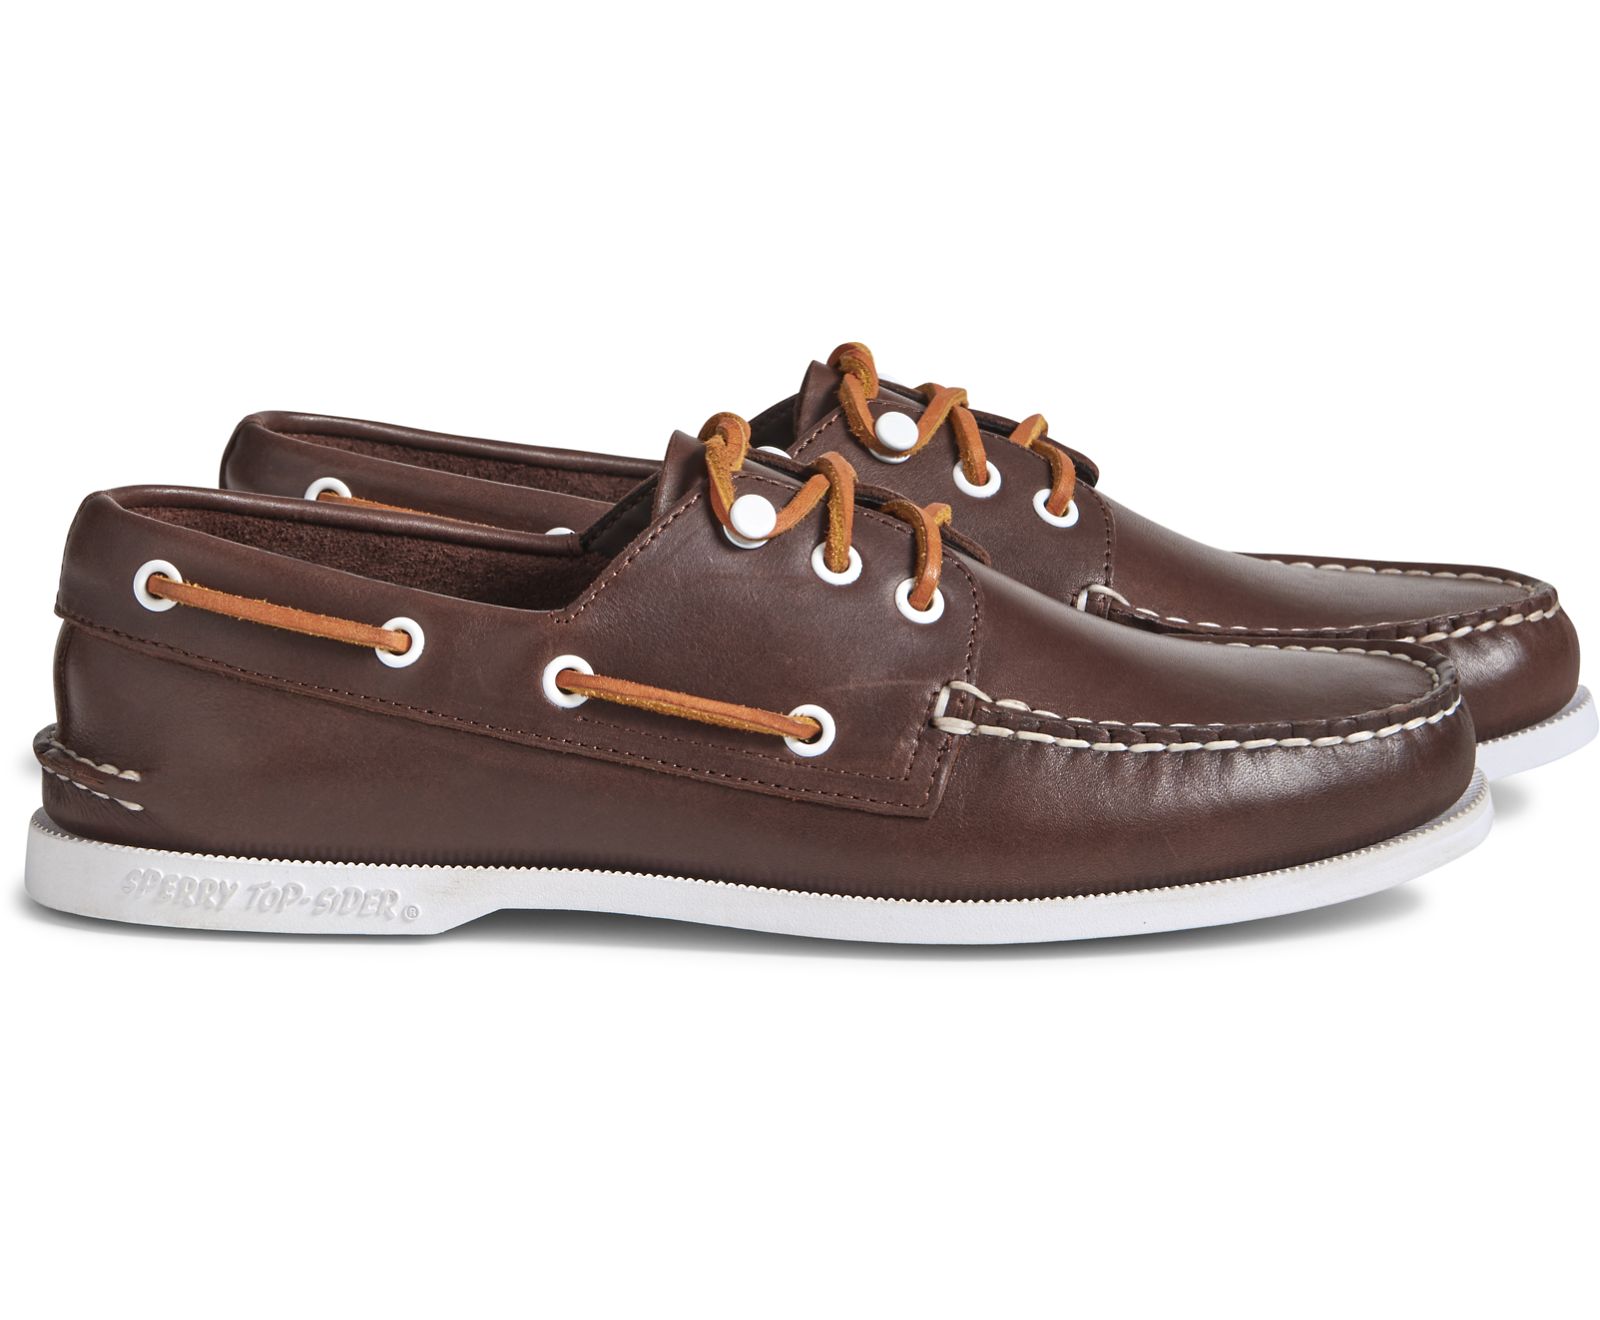 Men's Cloud Authentic Original 3-Eye Leather Boat Shoe - Classic Brown - Click Image to Close